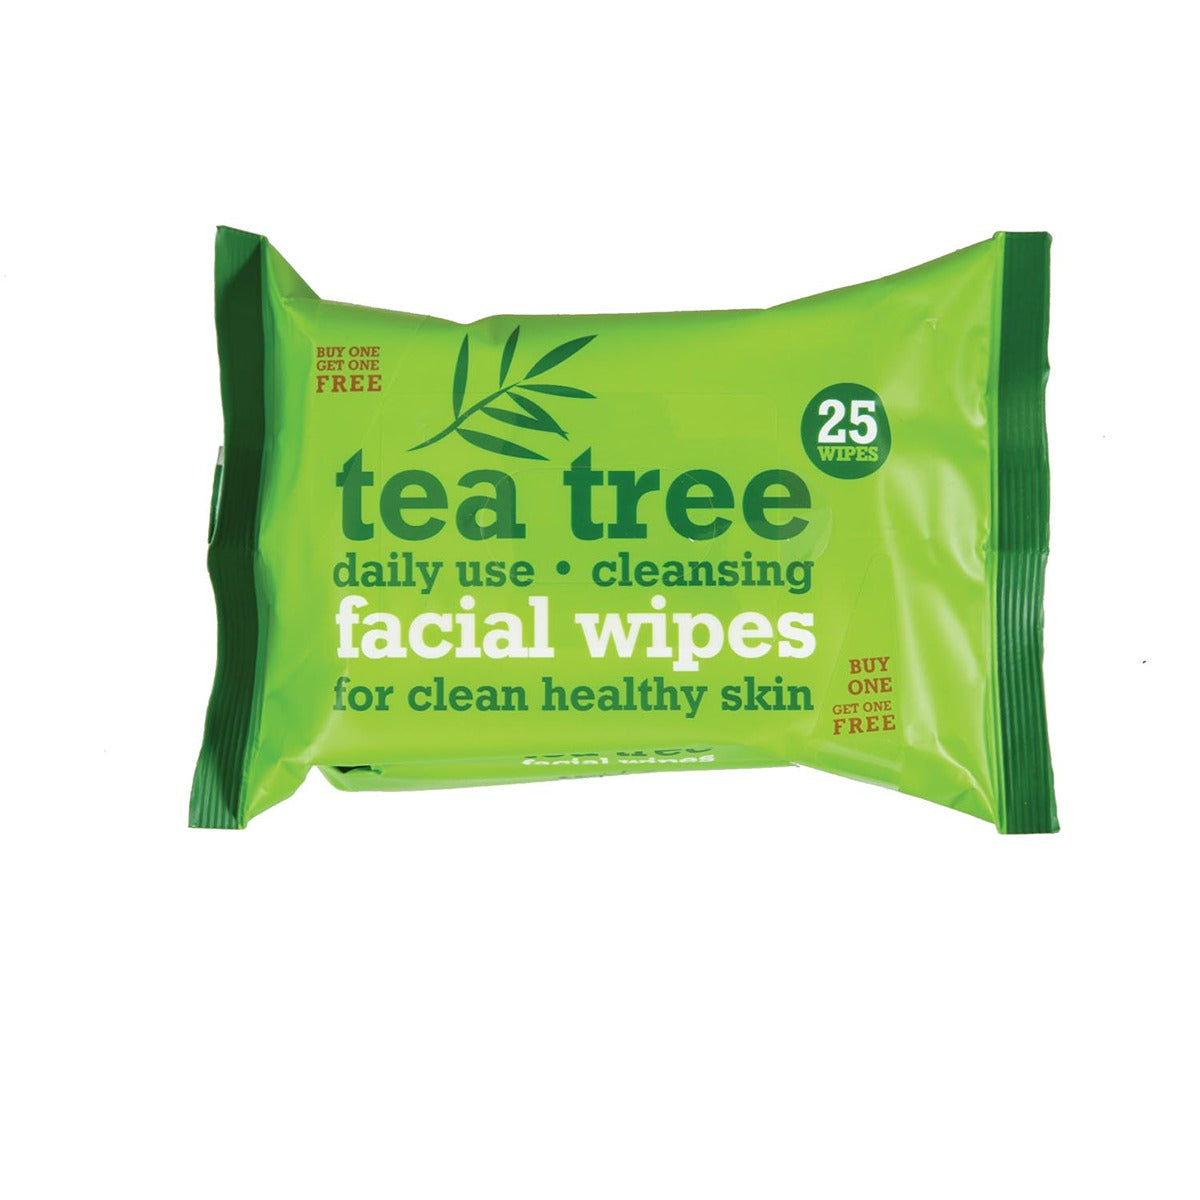 Tea Tree - Facial Wipes - Pack of 25 - Continental Food Store